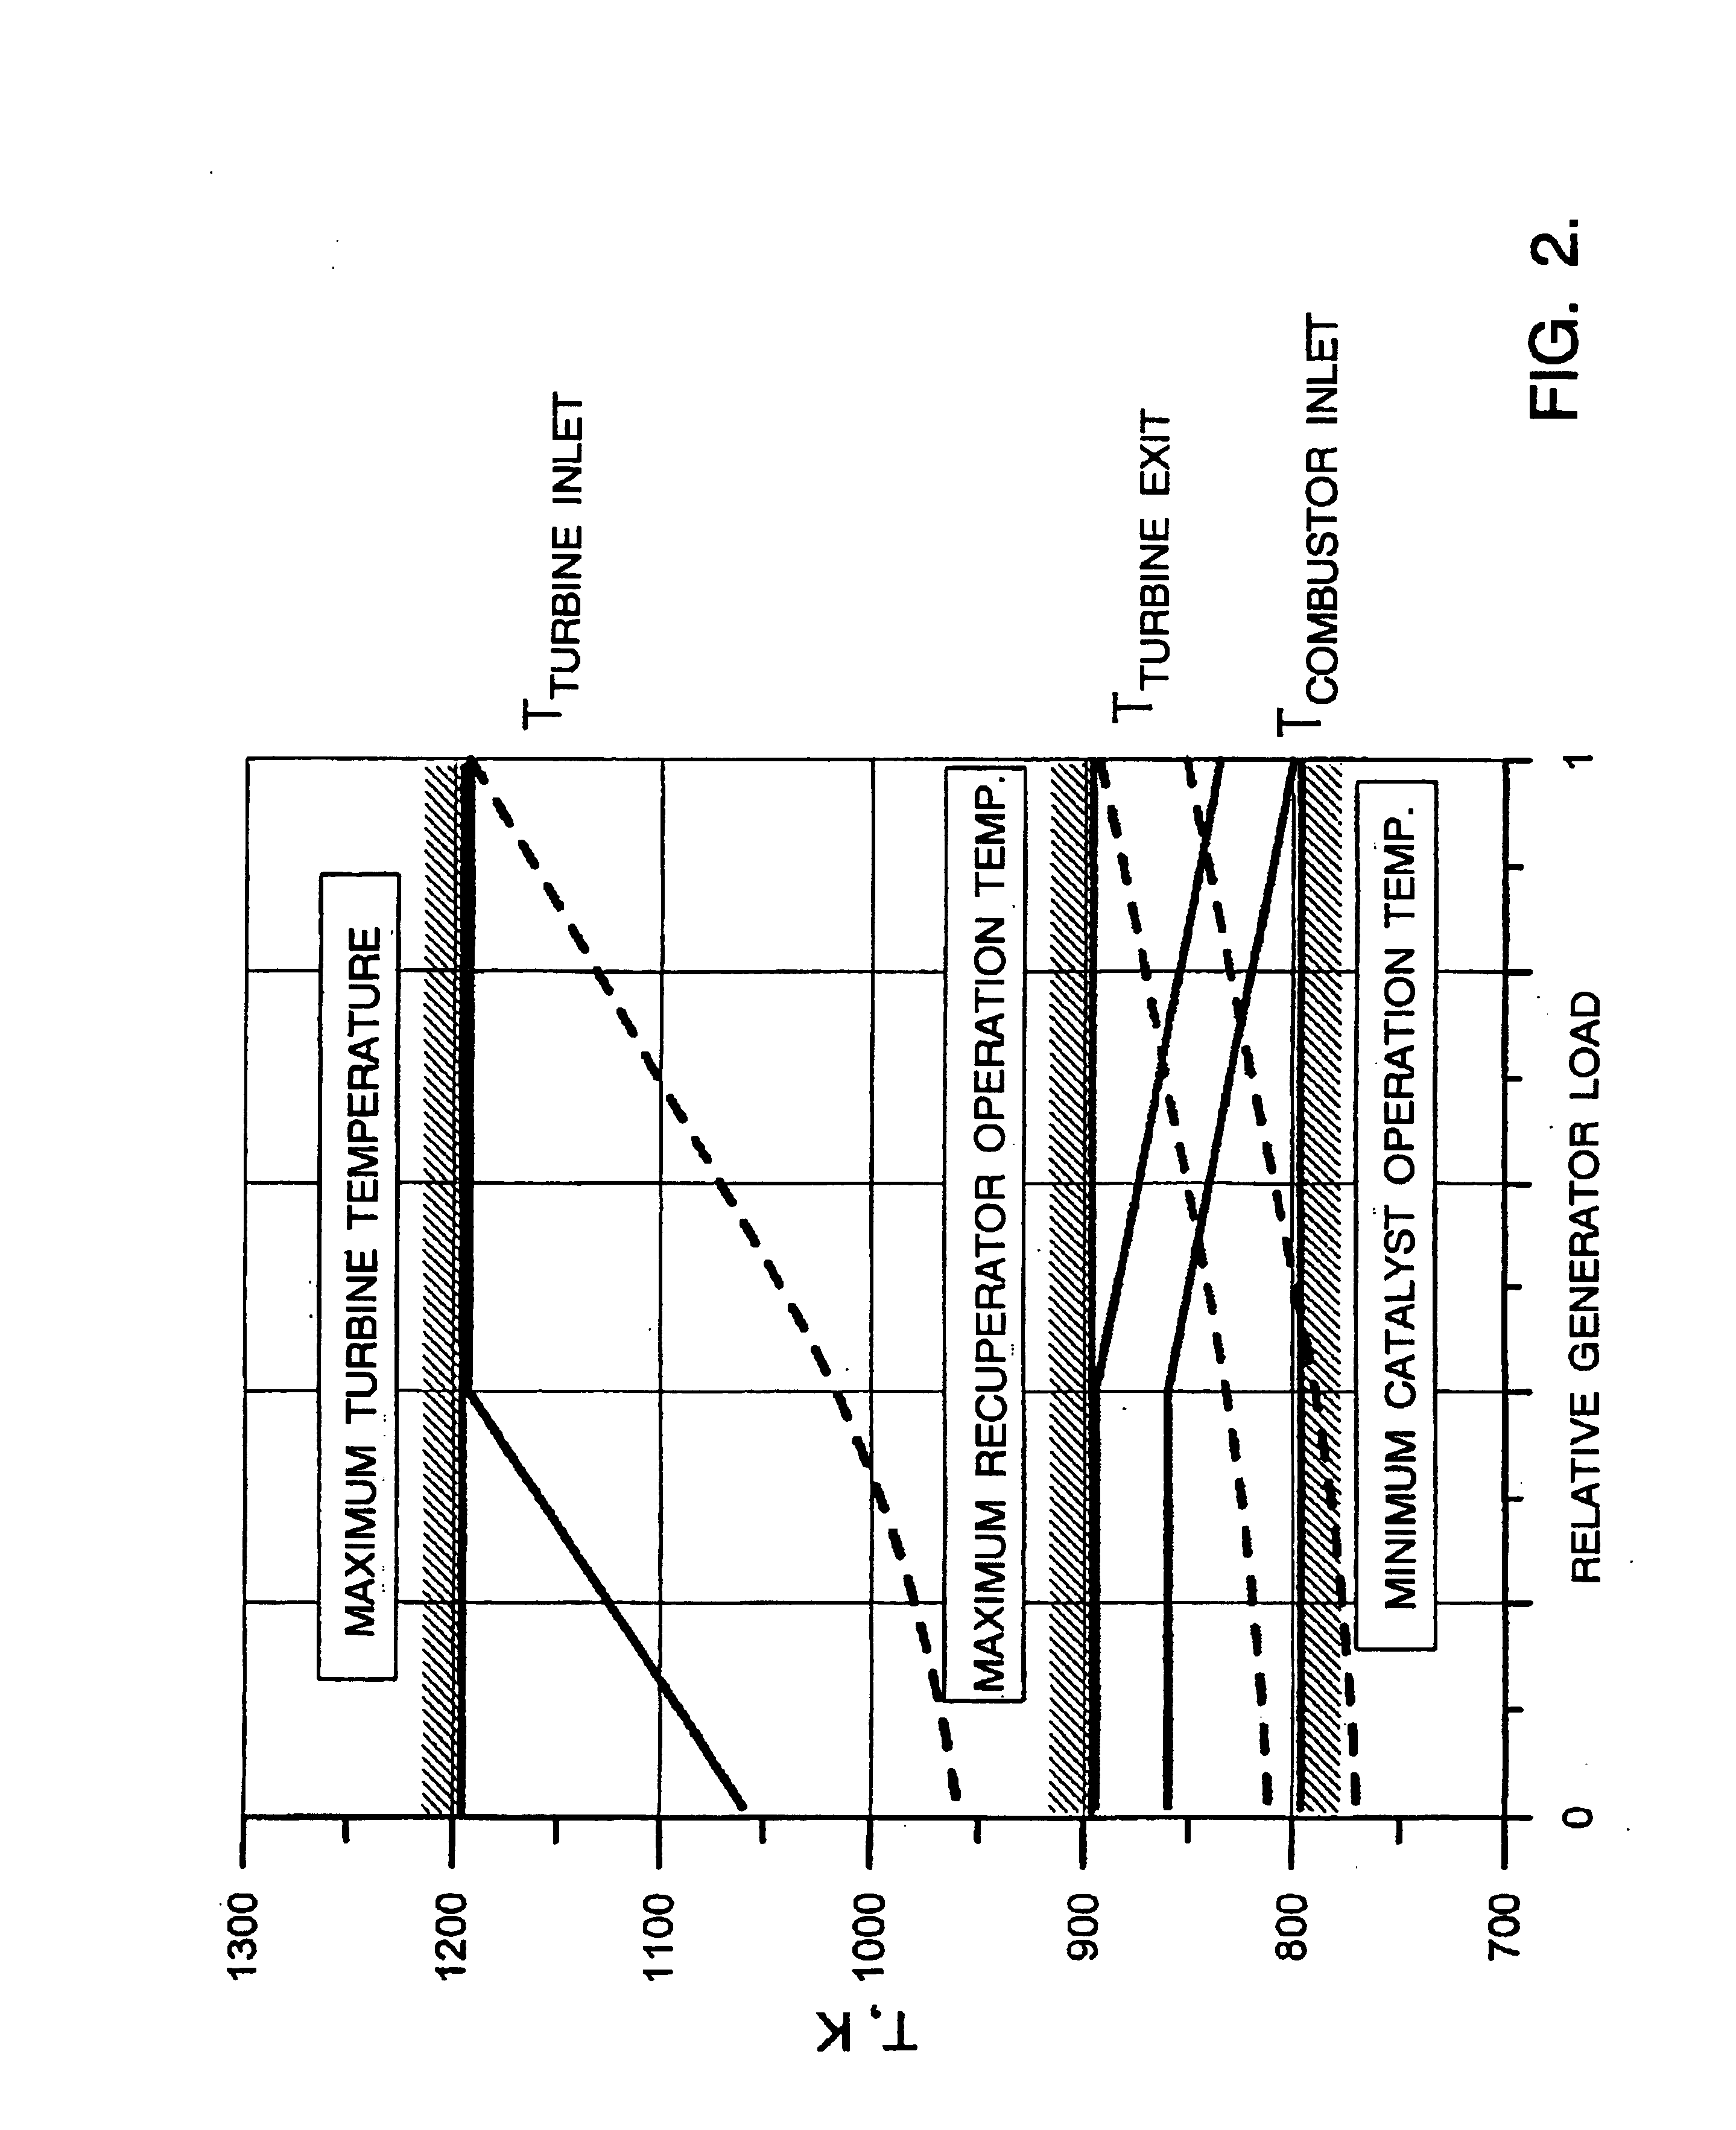 Electrical power generation system and method